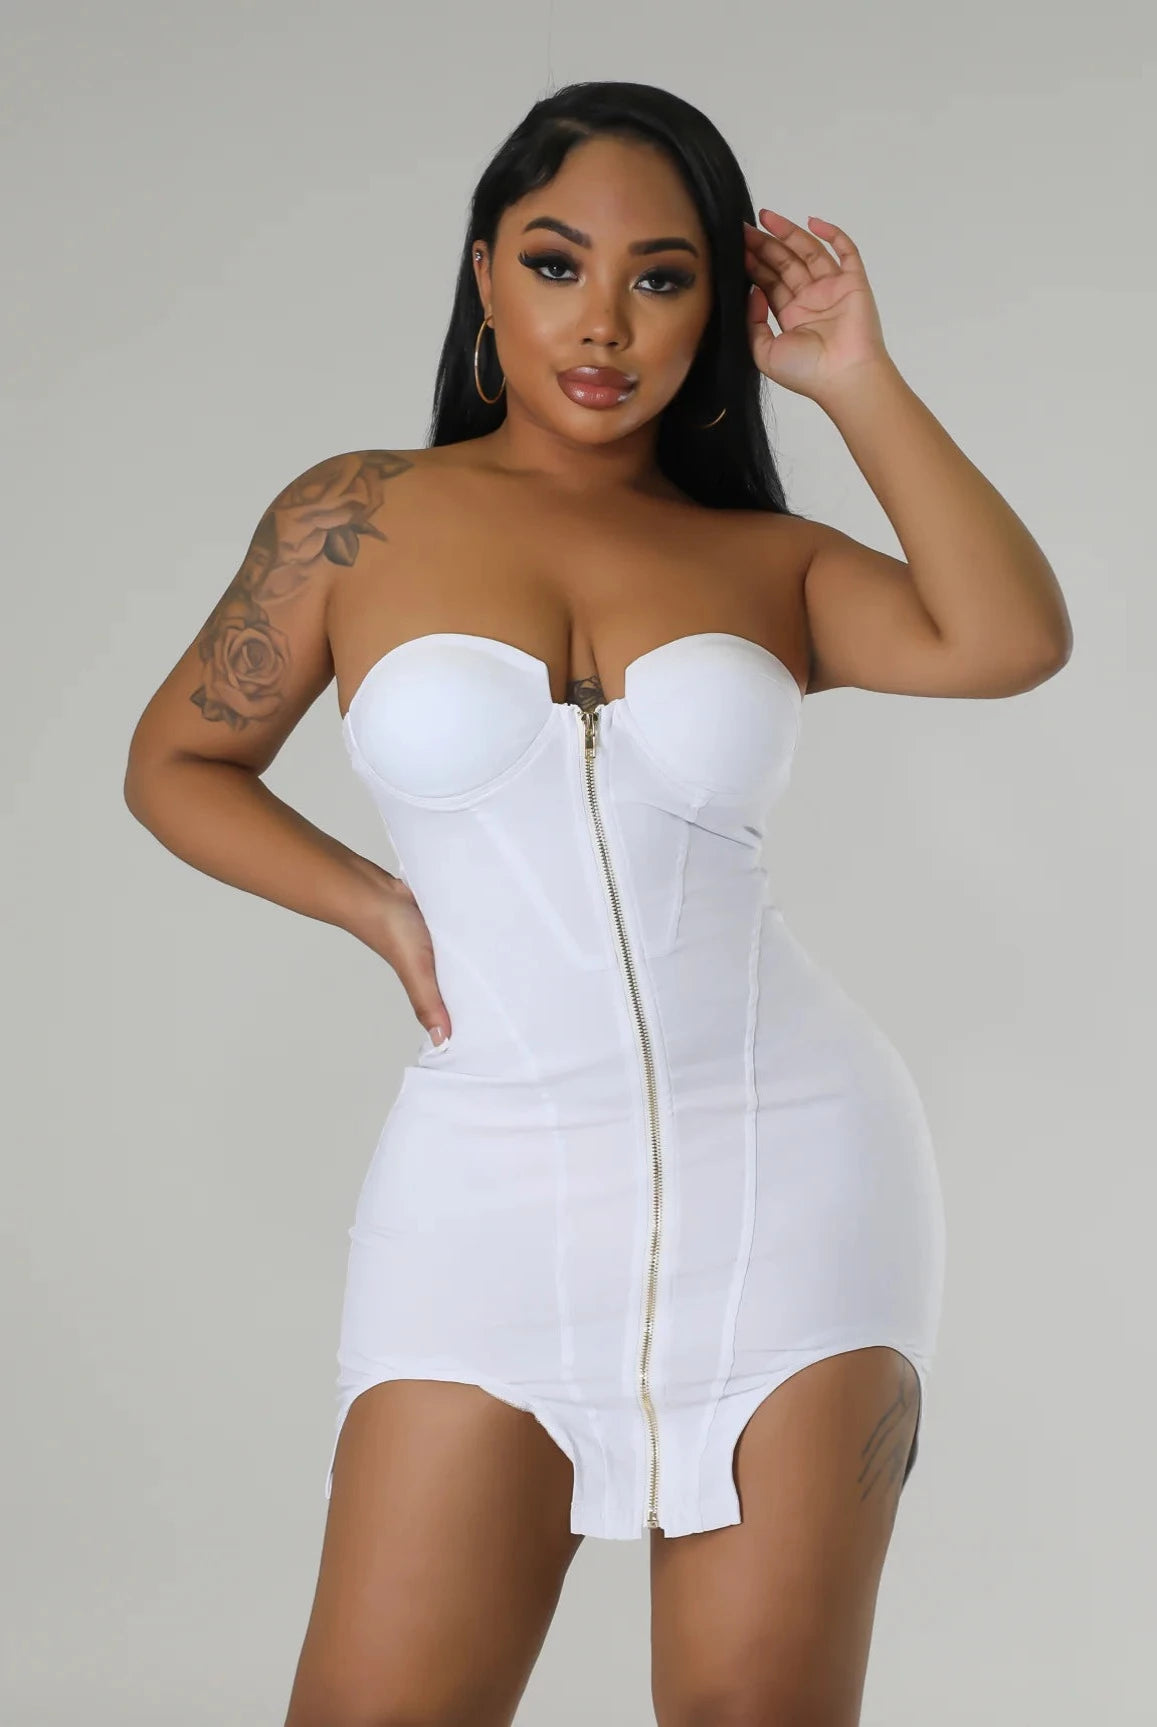 Special Delivery....Tube Front Zipper Mini Dress Good Time USA